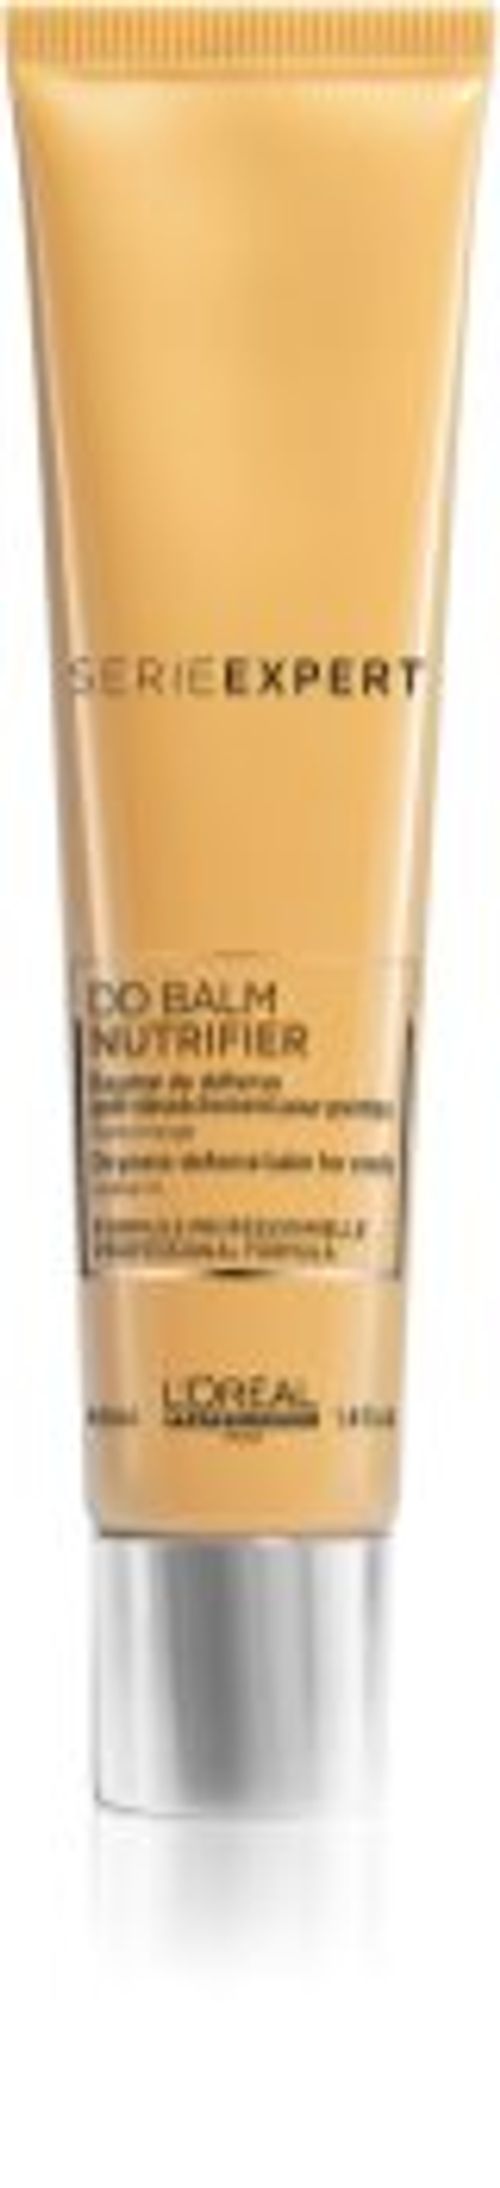 Loreal Professionnel Sesrie Expert fier Dryness-defense Balm for Hair Ends